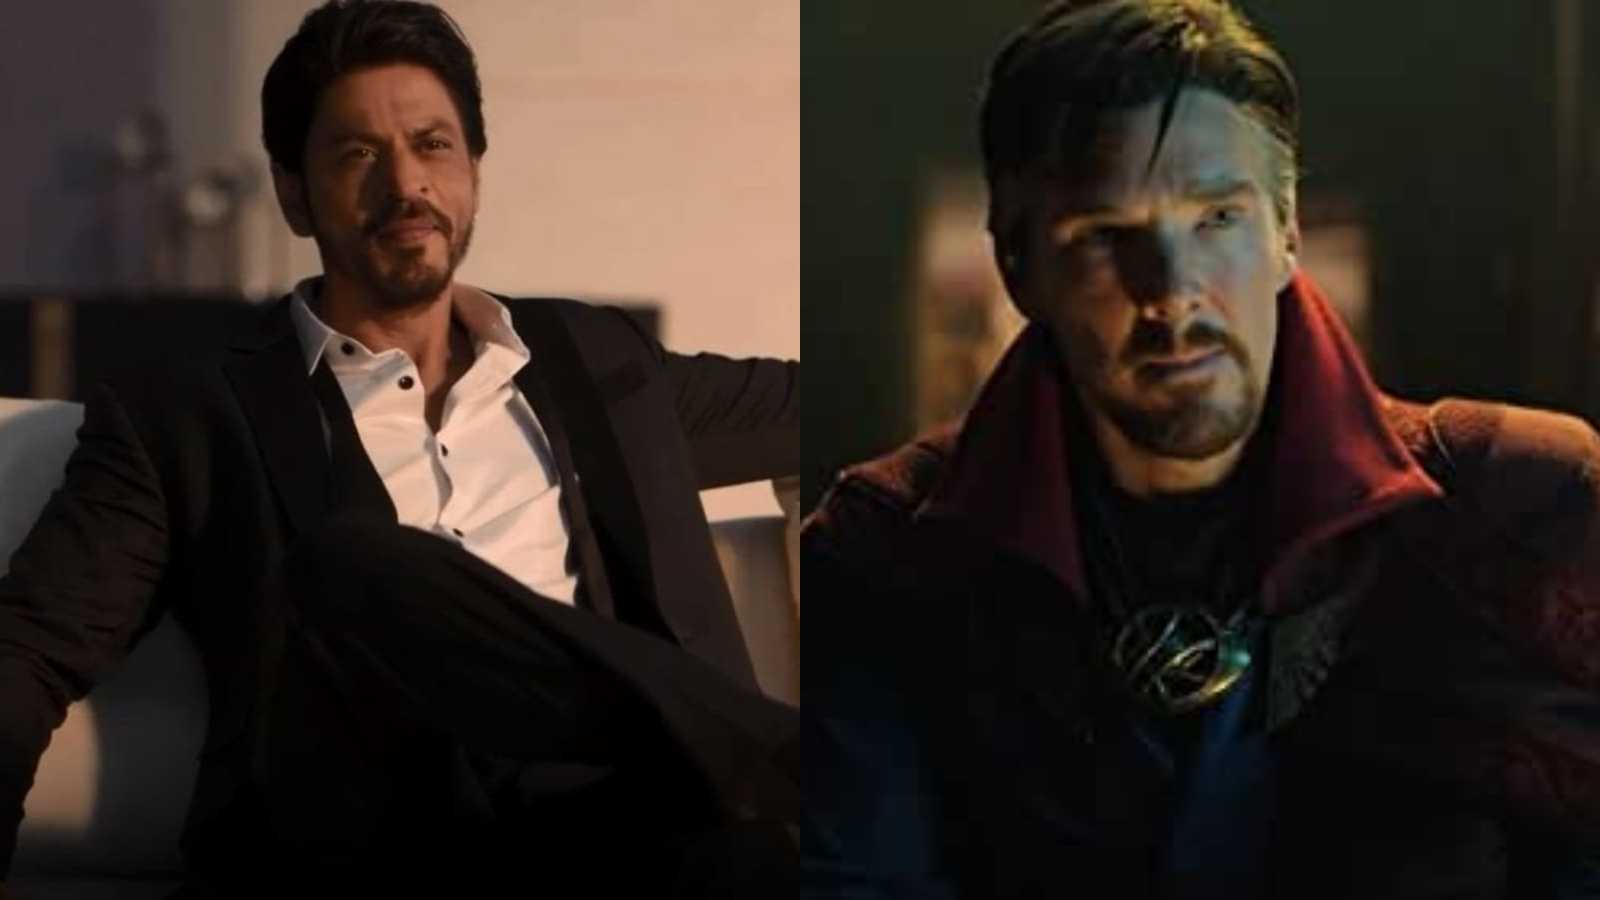 Doctor Strange star Benedict Cumberbatch wants Shah Rukh Khan to debut in the MCU, talks about his visit to India